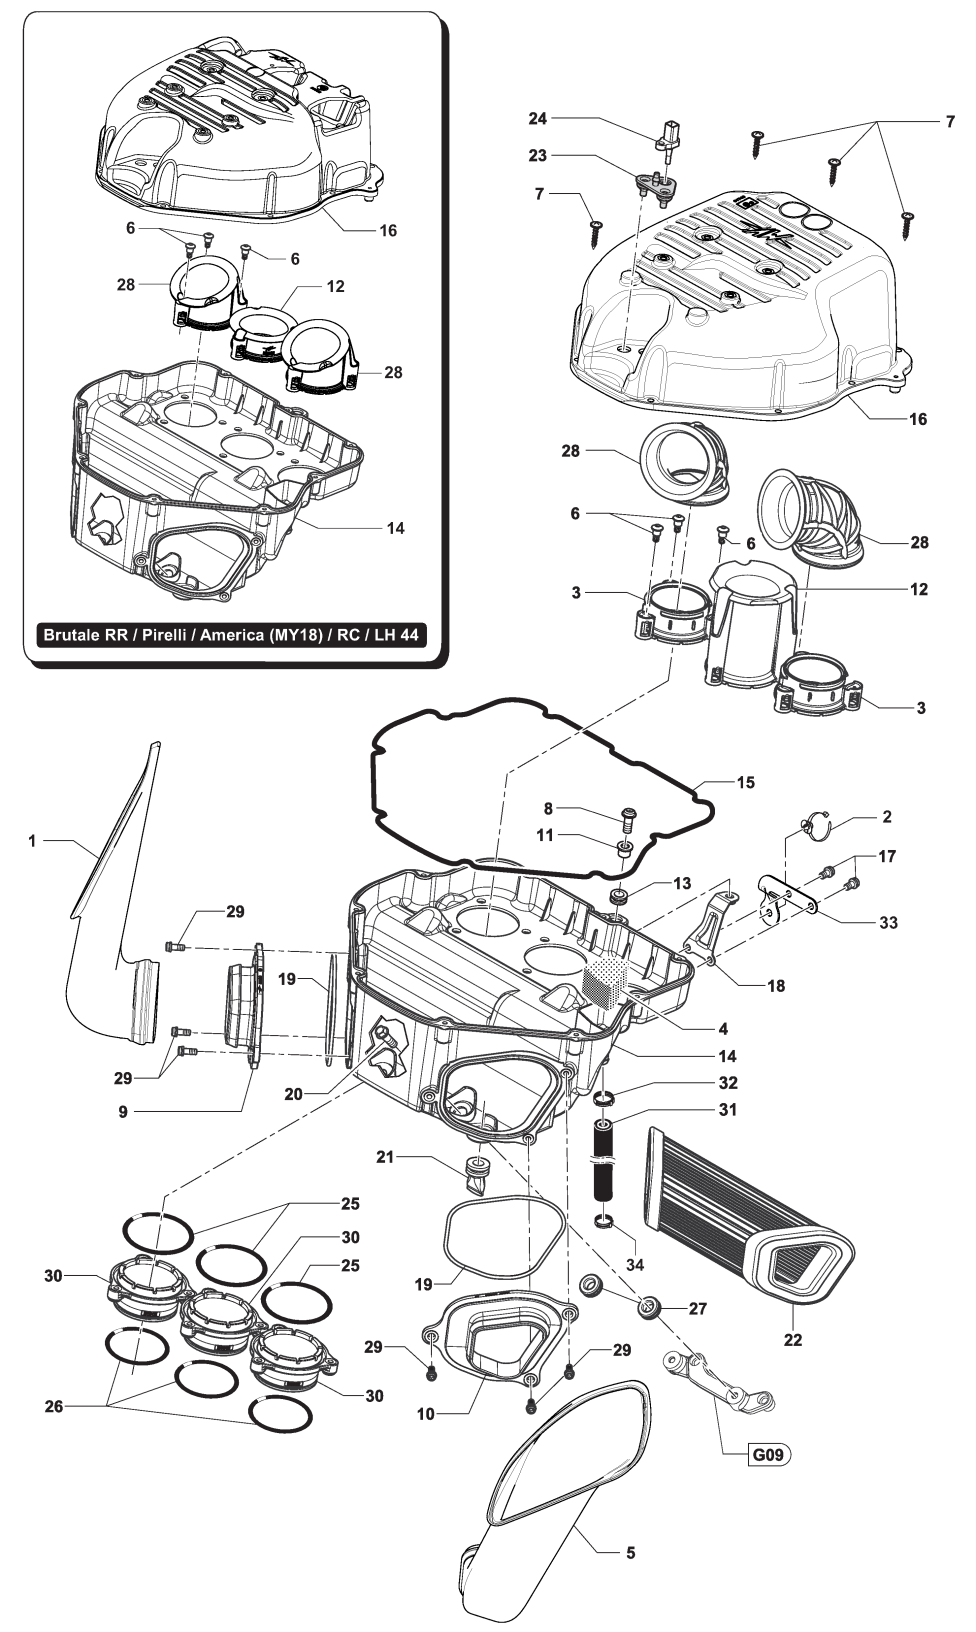 Airbox Assembly


